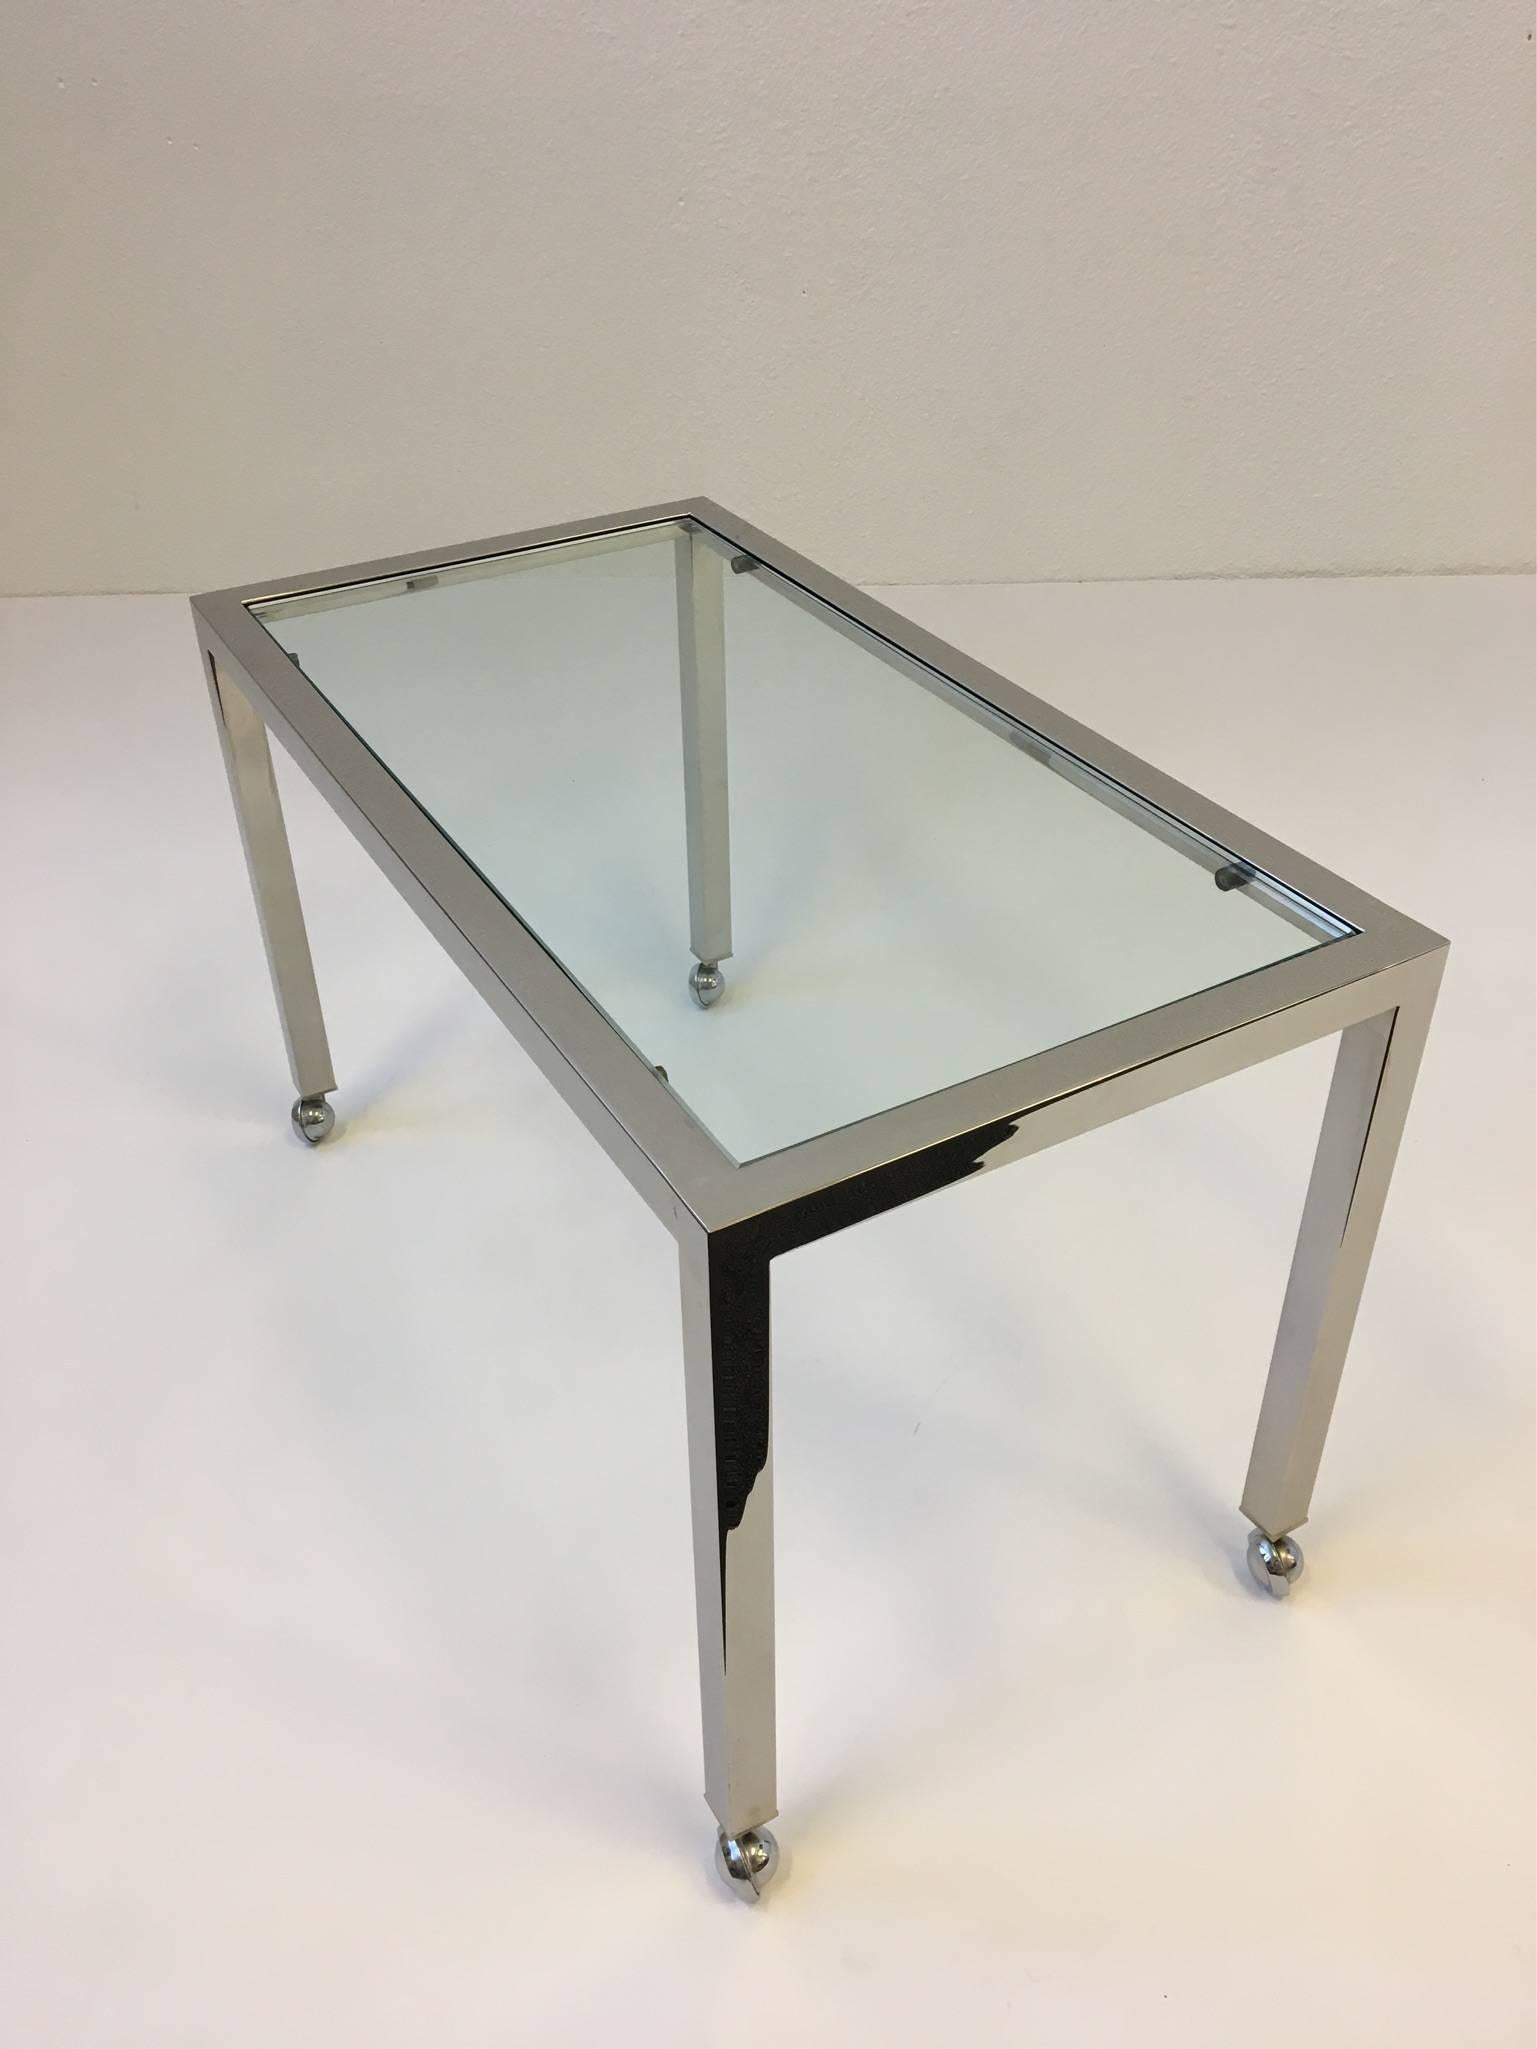 Polished Chrome and Glass on Casters Side Table, style of Milo Baughman